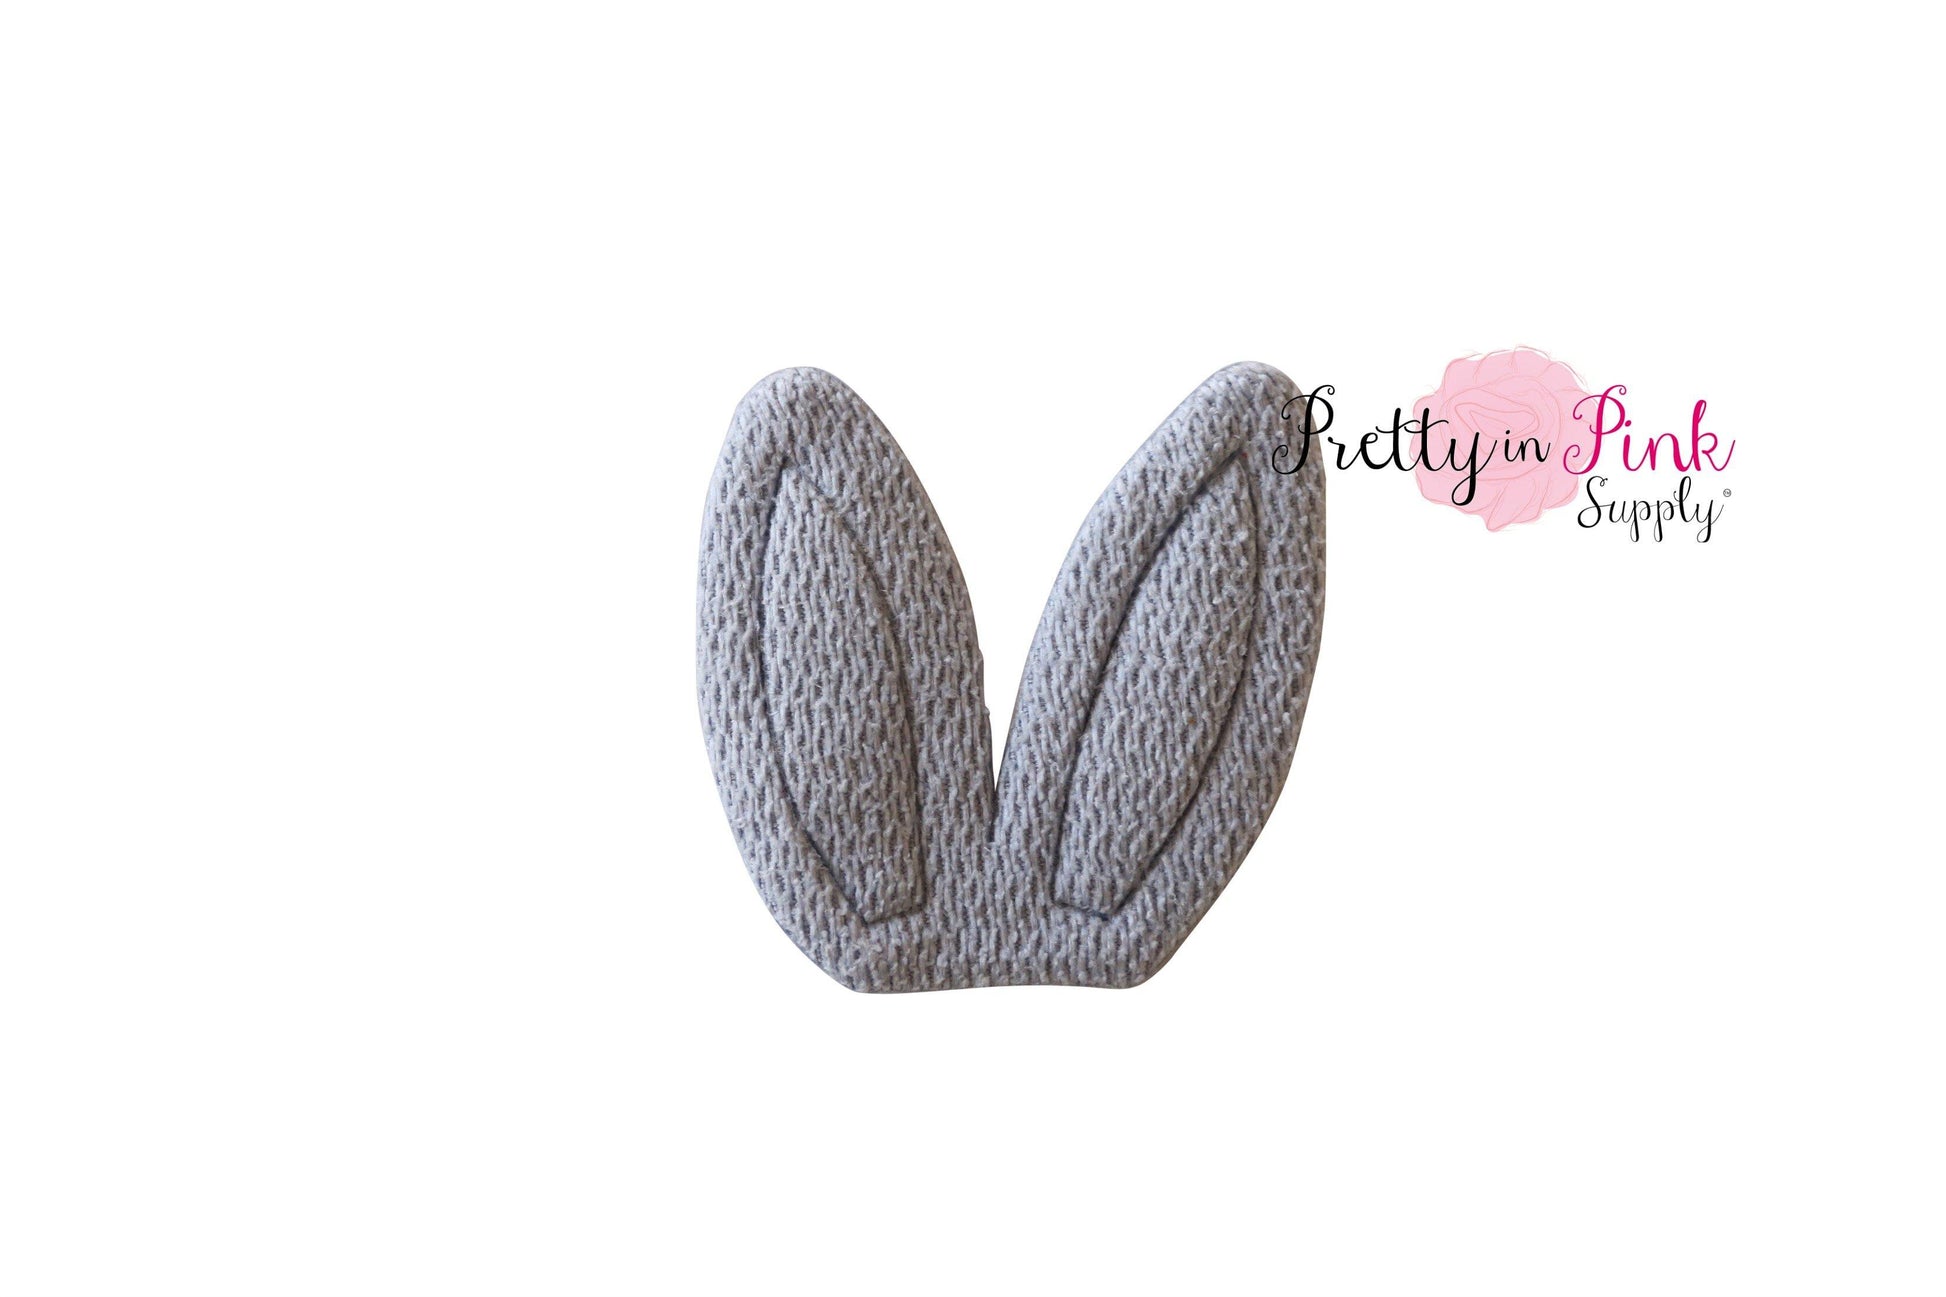 Soft Fabric Bunny Ears - Pretty in Pink Supply